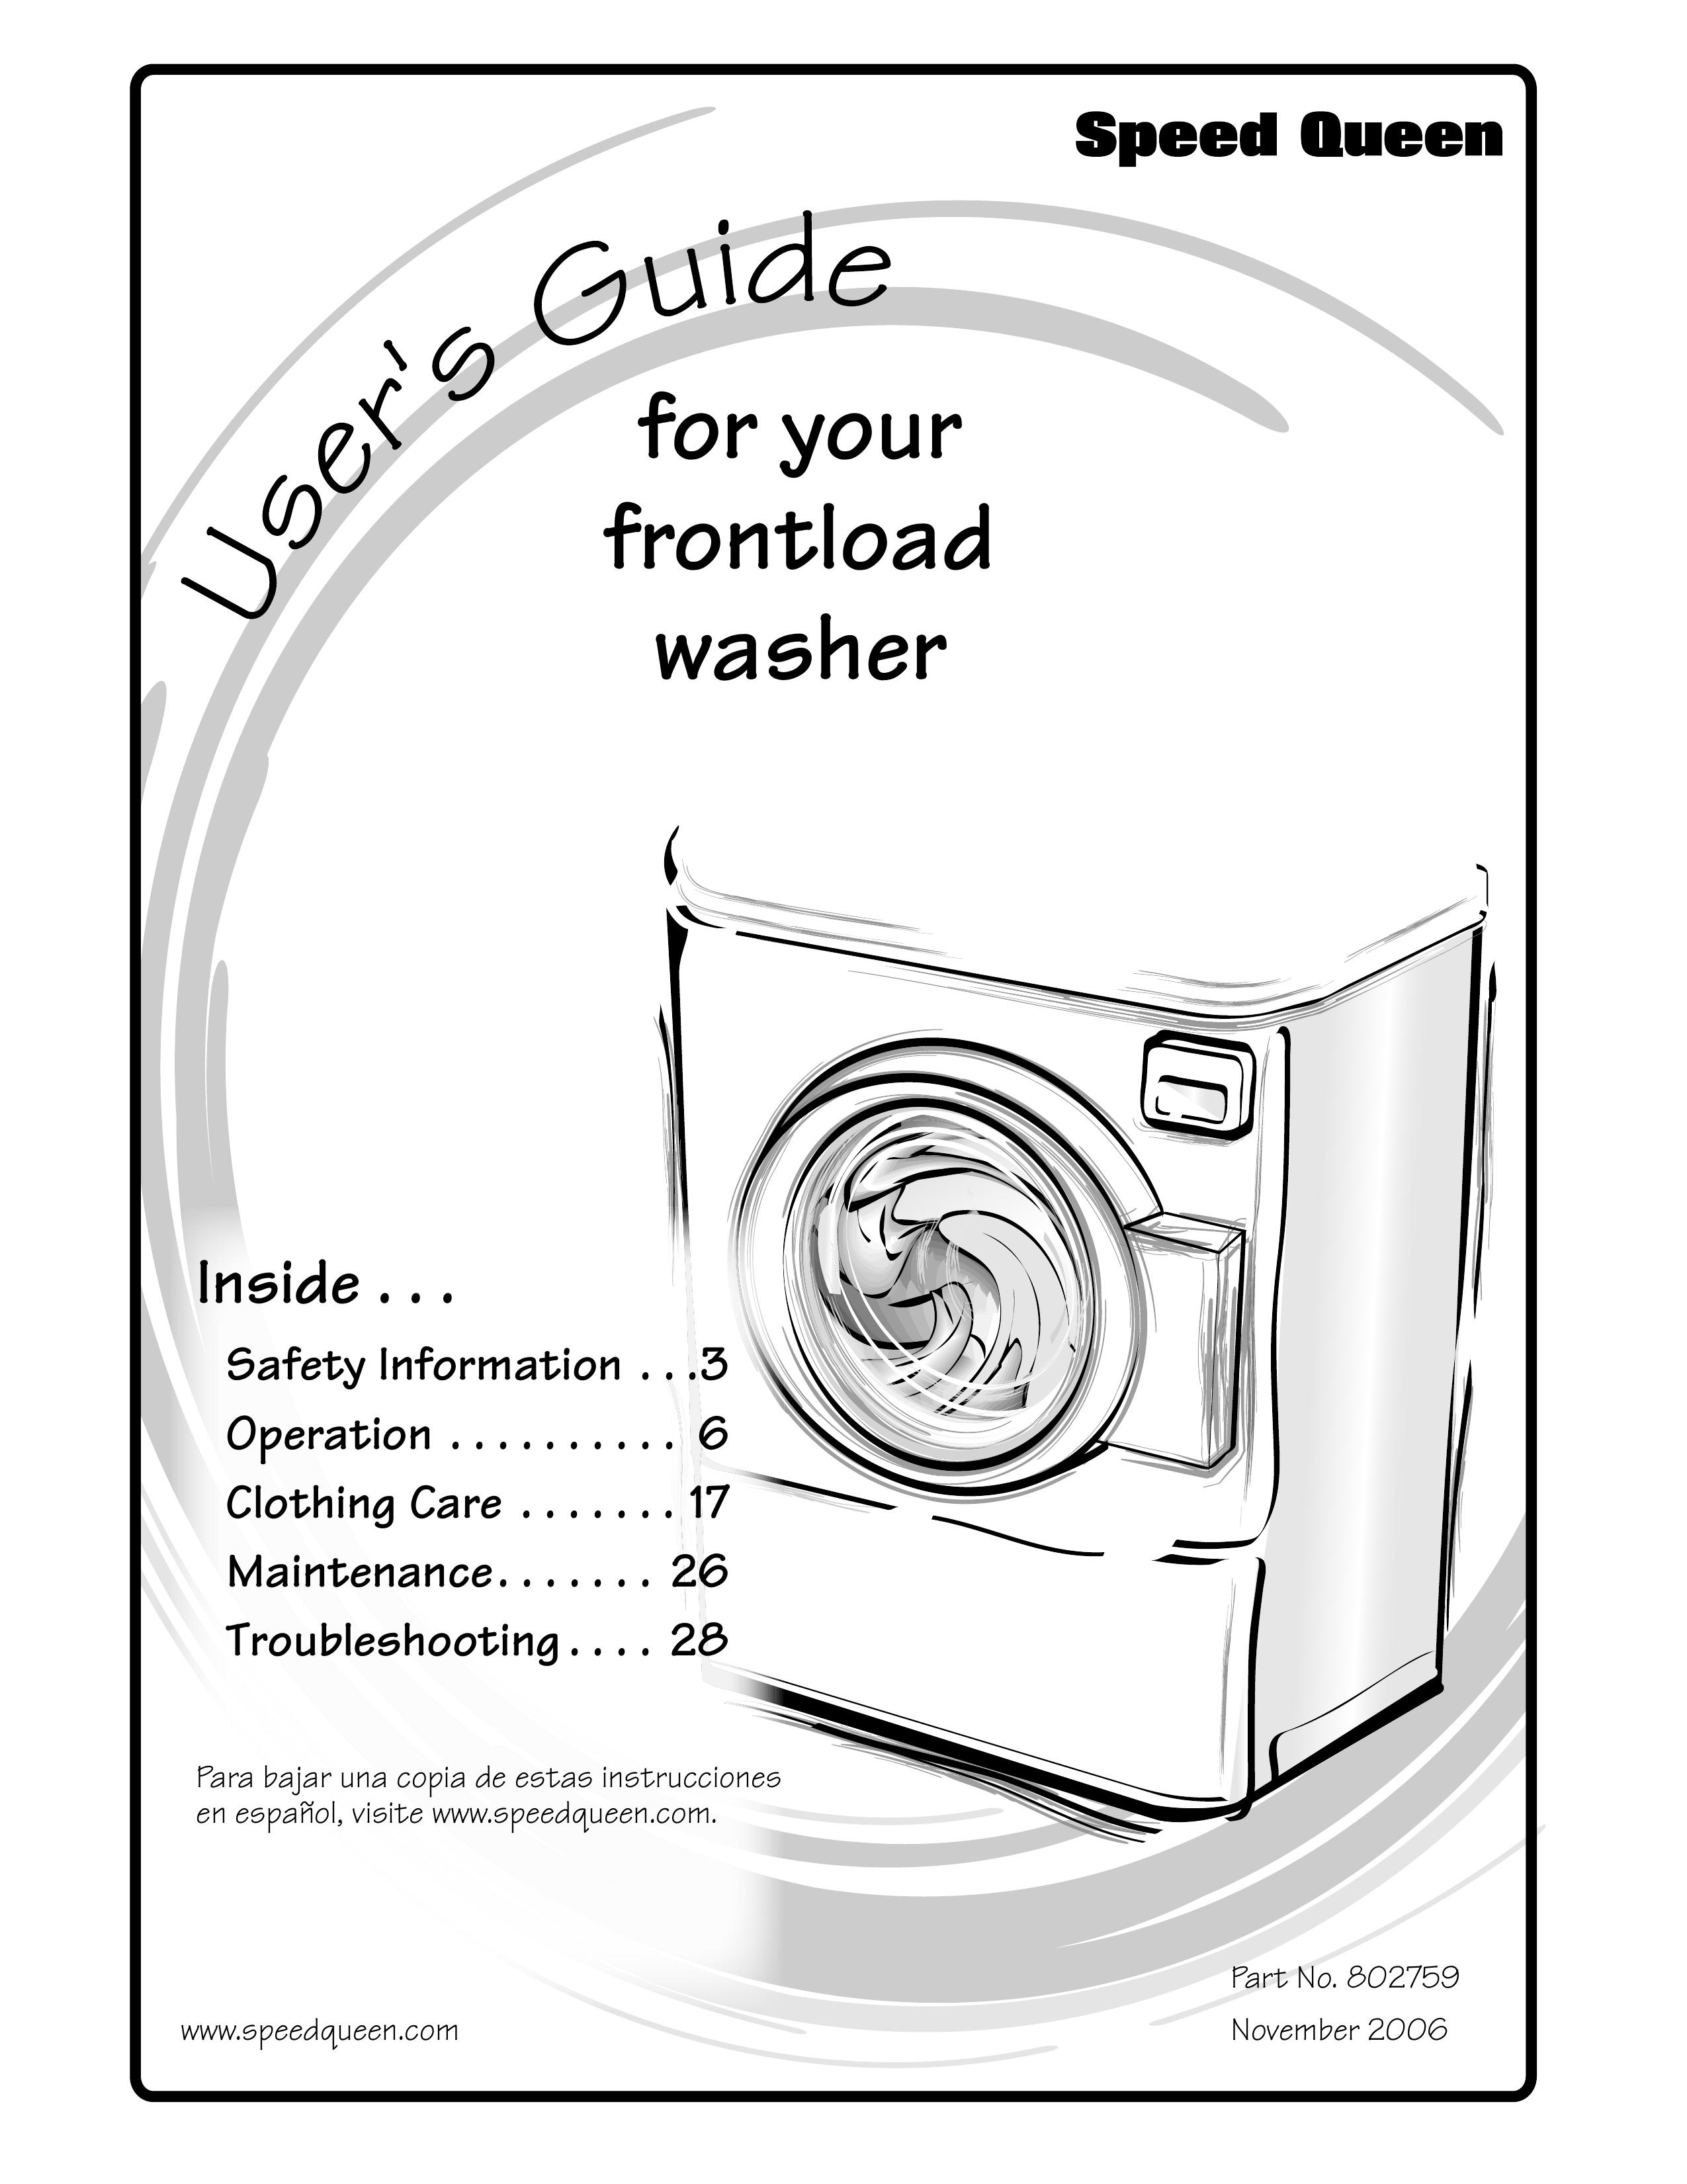 Speed Queen 802759 Washer User Manual